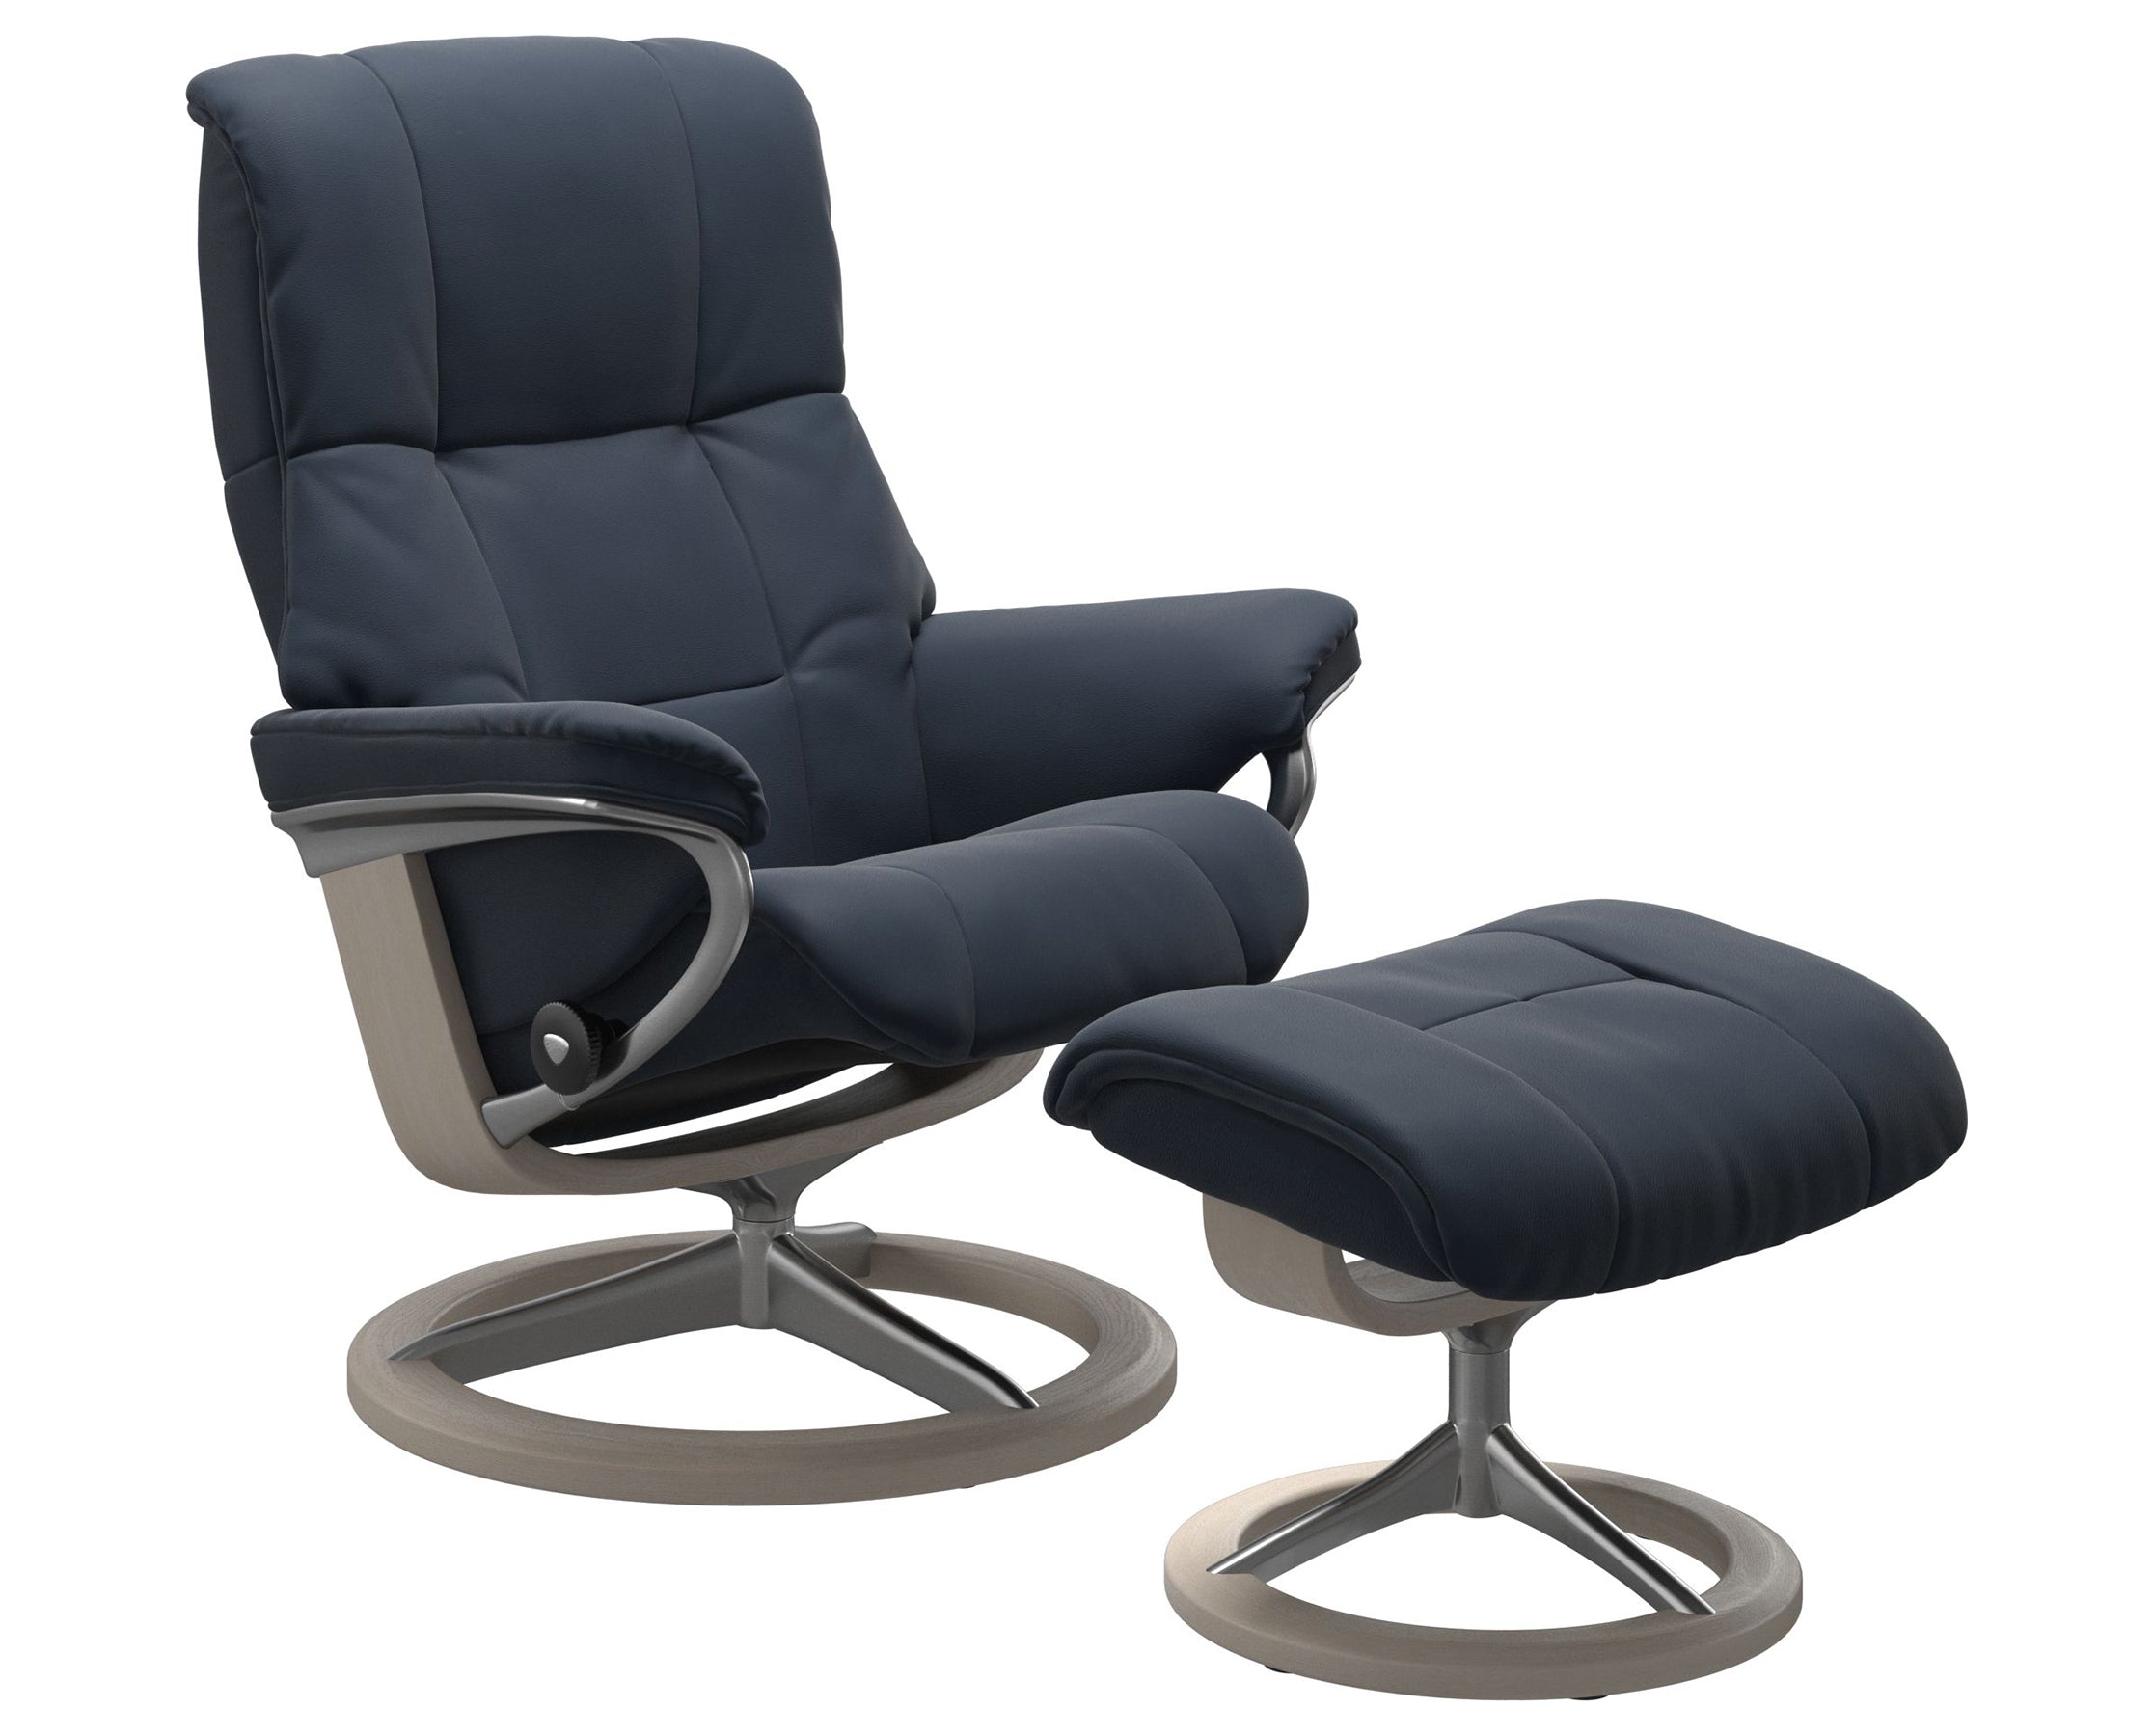 Paloma Leather Oxford Blue S/M/L and Whitewash Base | Stressless Mayfair Signature Recliner | Valley Ridge Furniture